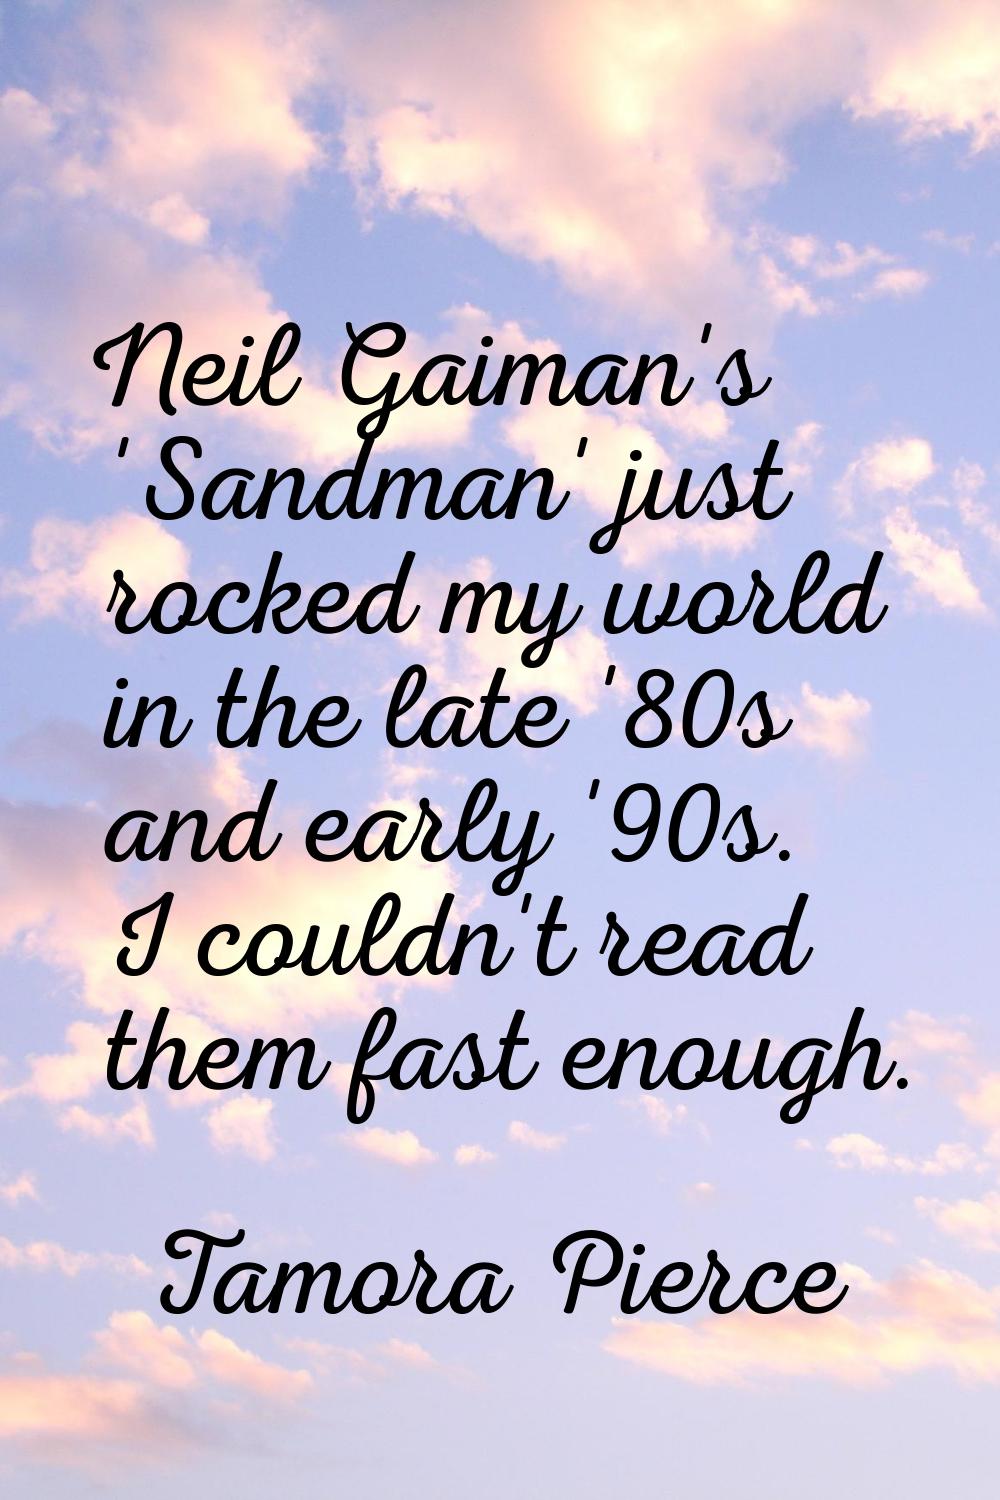 Neil Gaiman's 'Sandman' just rocked my world in the late '80s and early '90s. I couldn't read them 